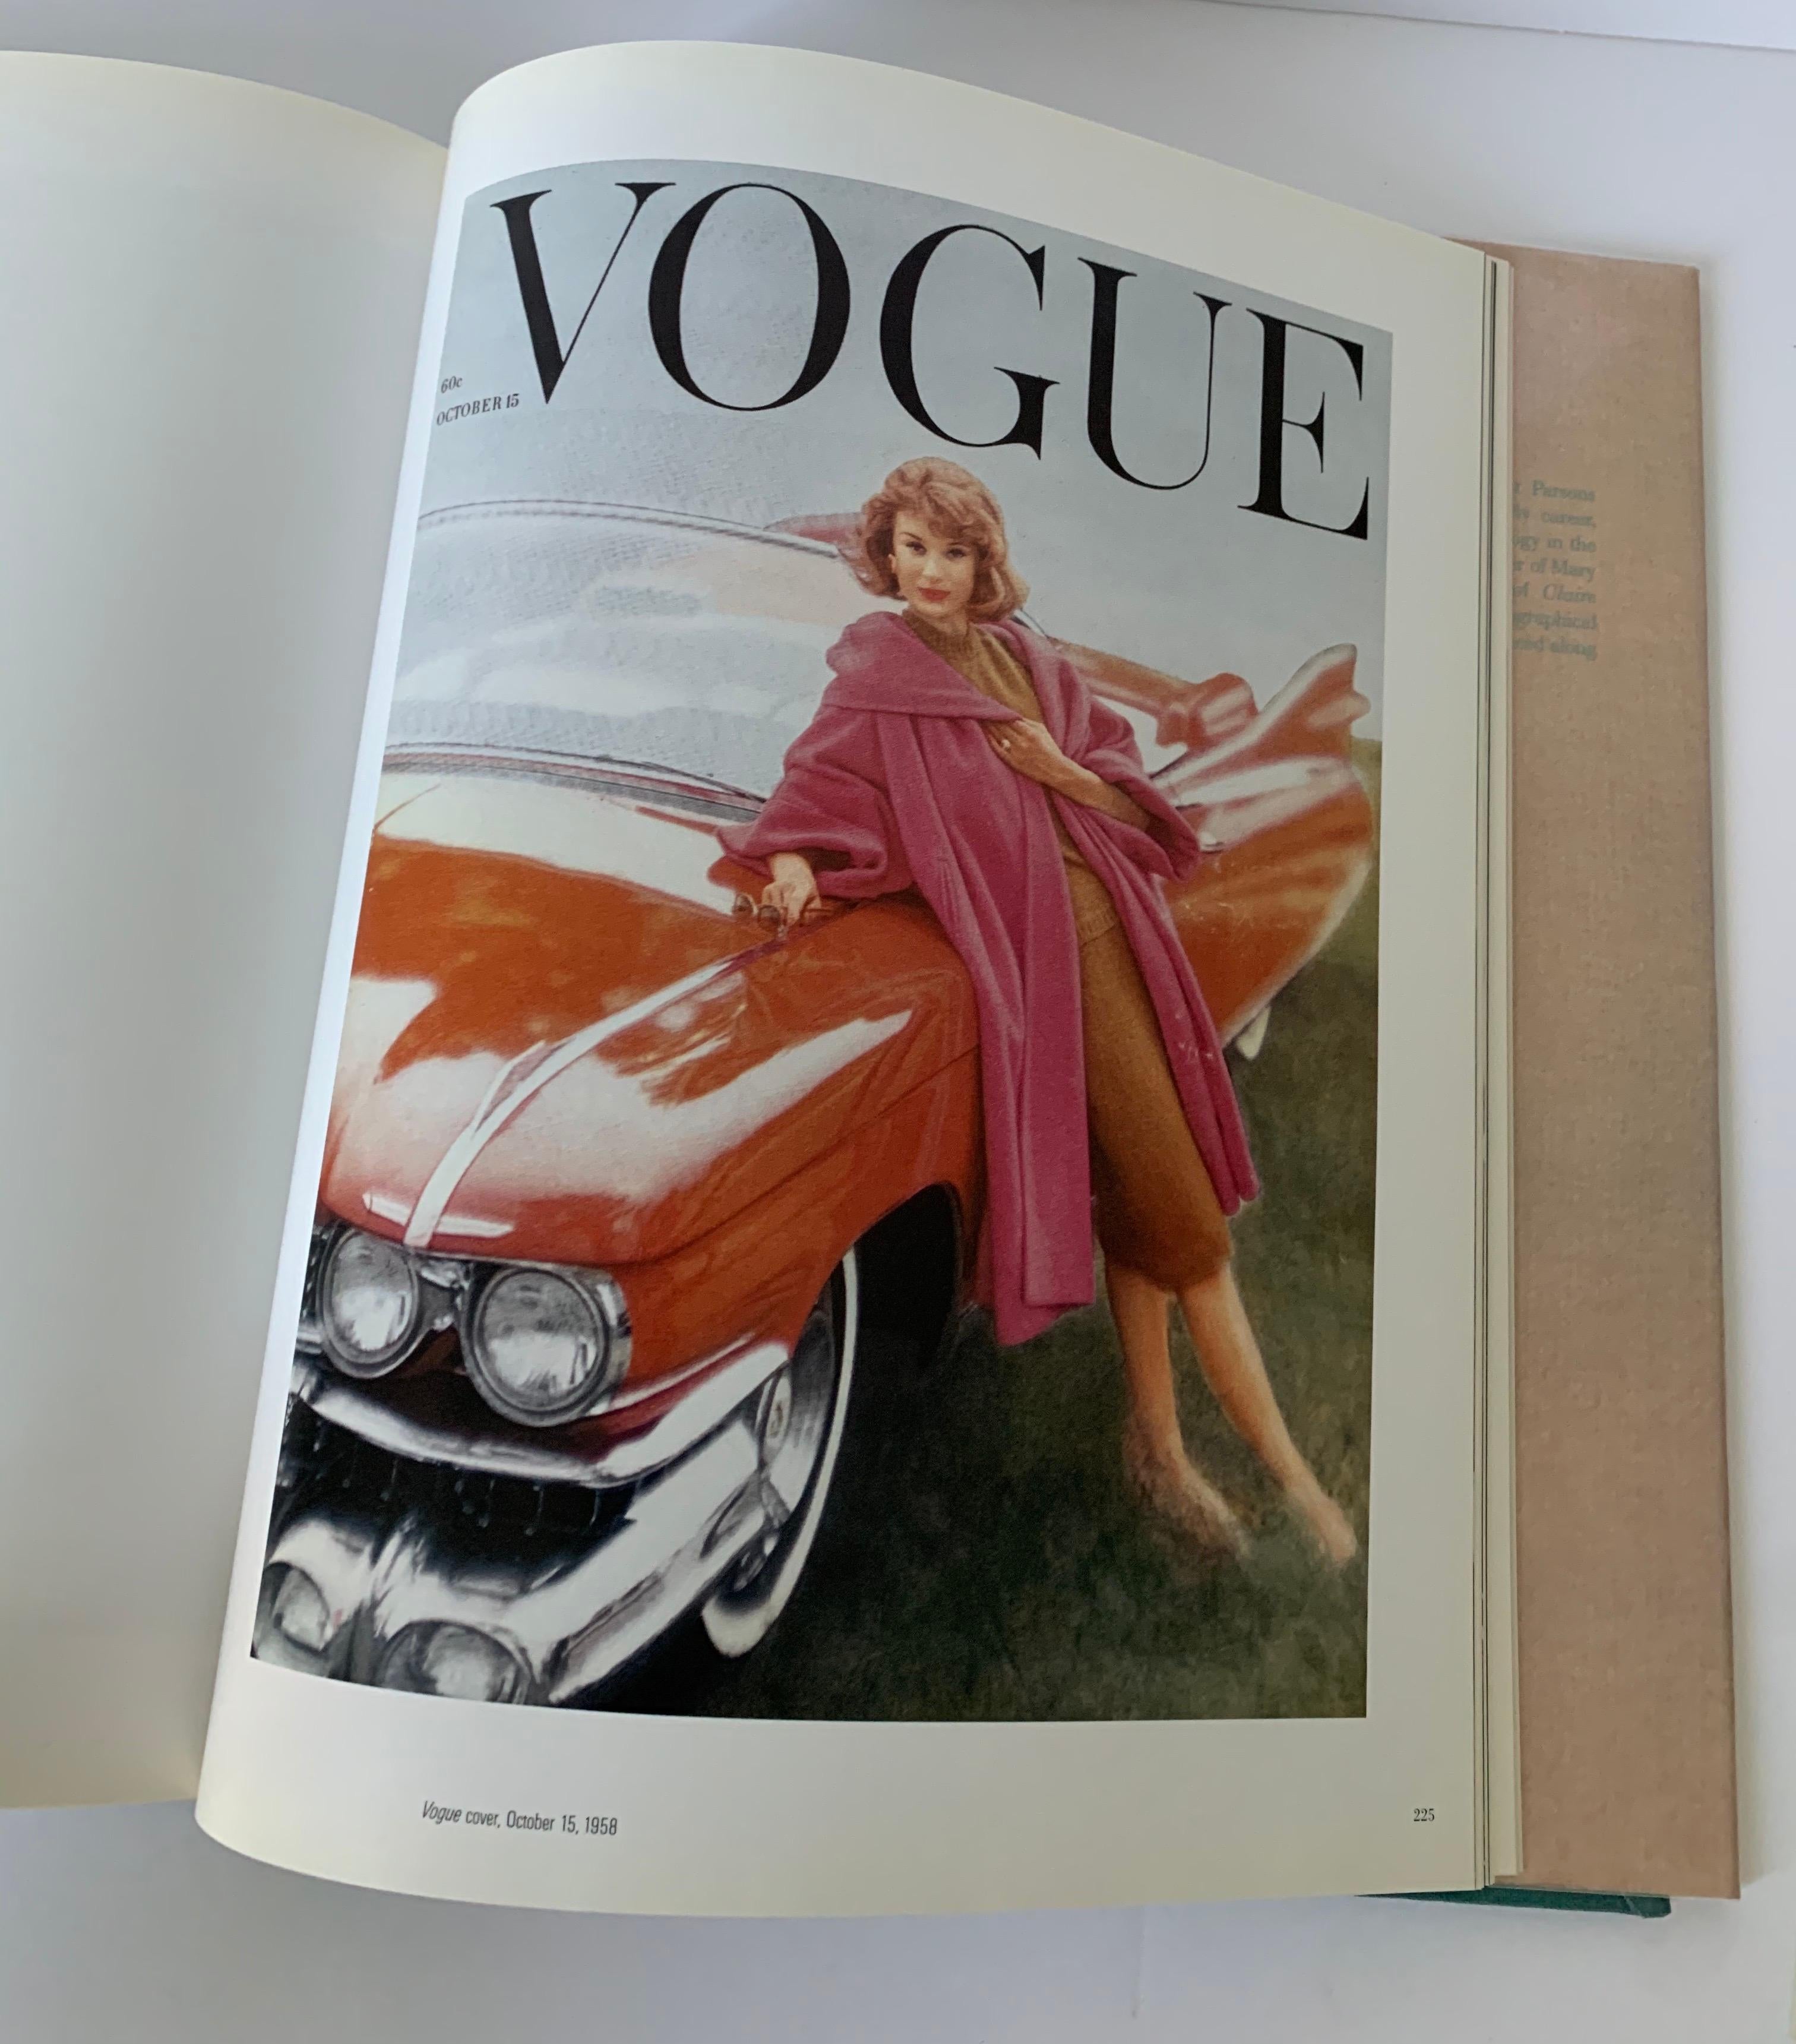 Paper John Rawlings 30 Years in Vogue First Edition Book